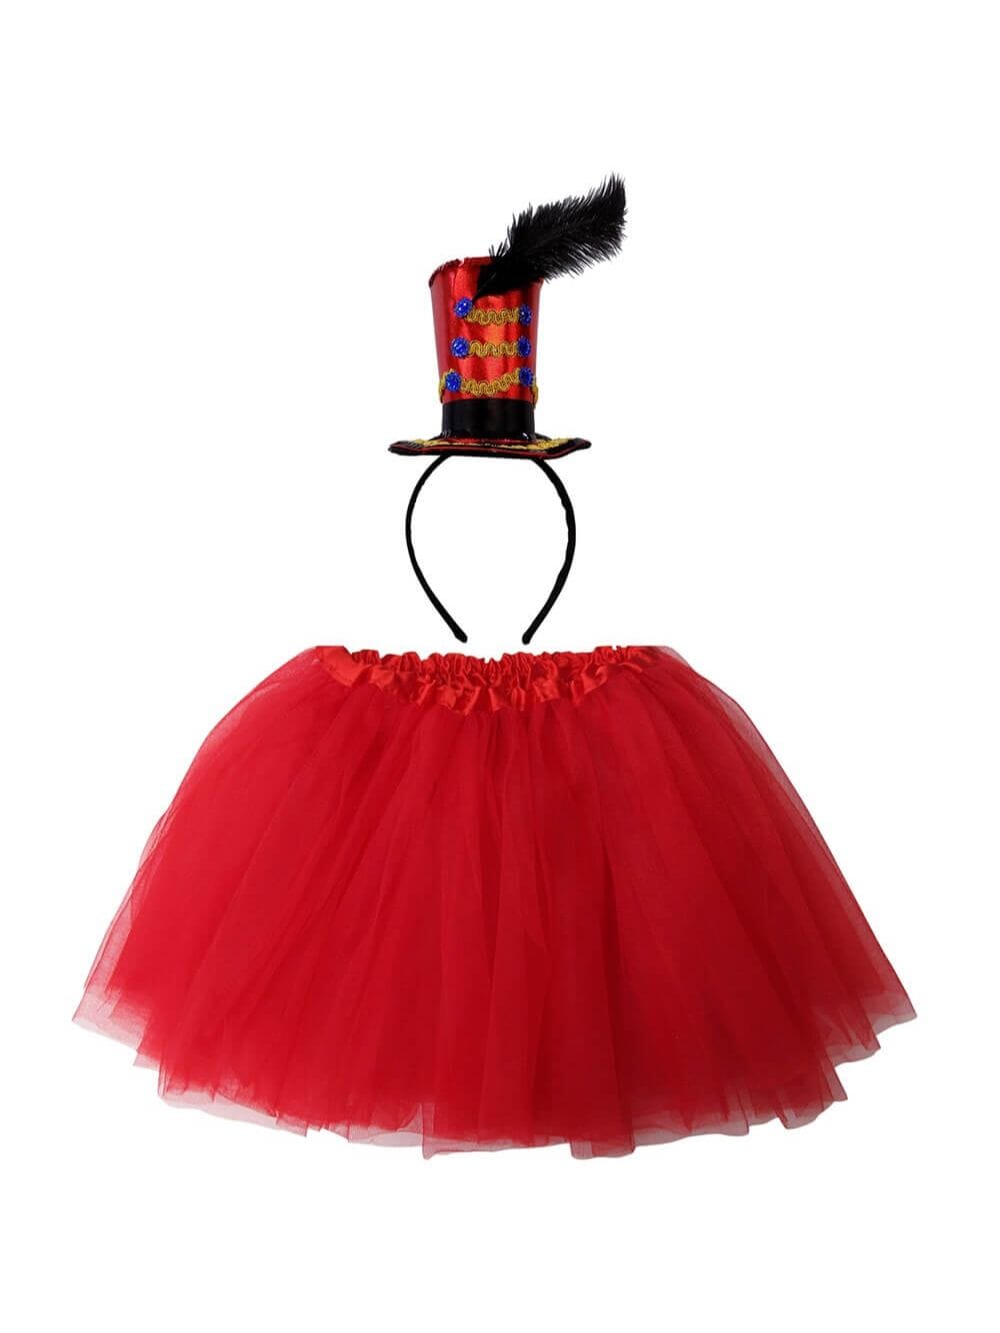 Girls Greatest Showman Inspired Circus Ringmaster Costume - Complete Kids Costume Set with Red Tutu & Headband Hat - Sydney So Sweet